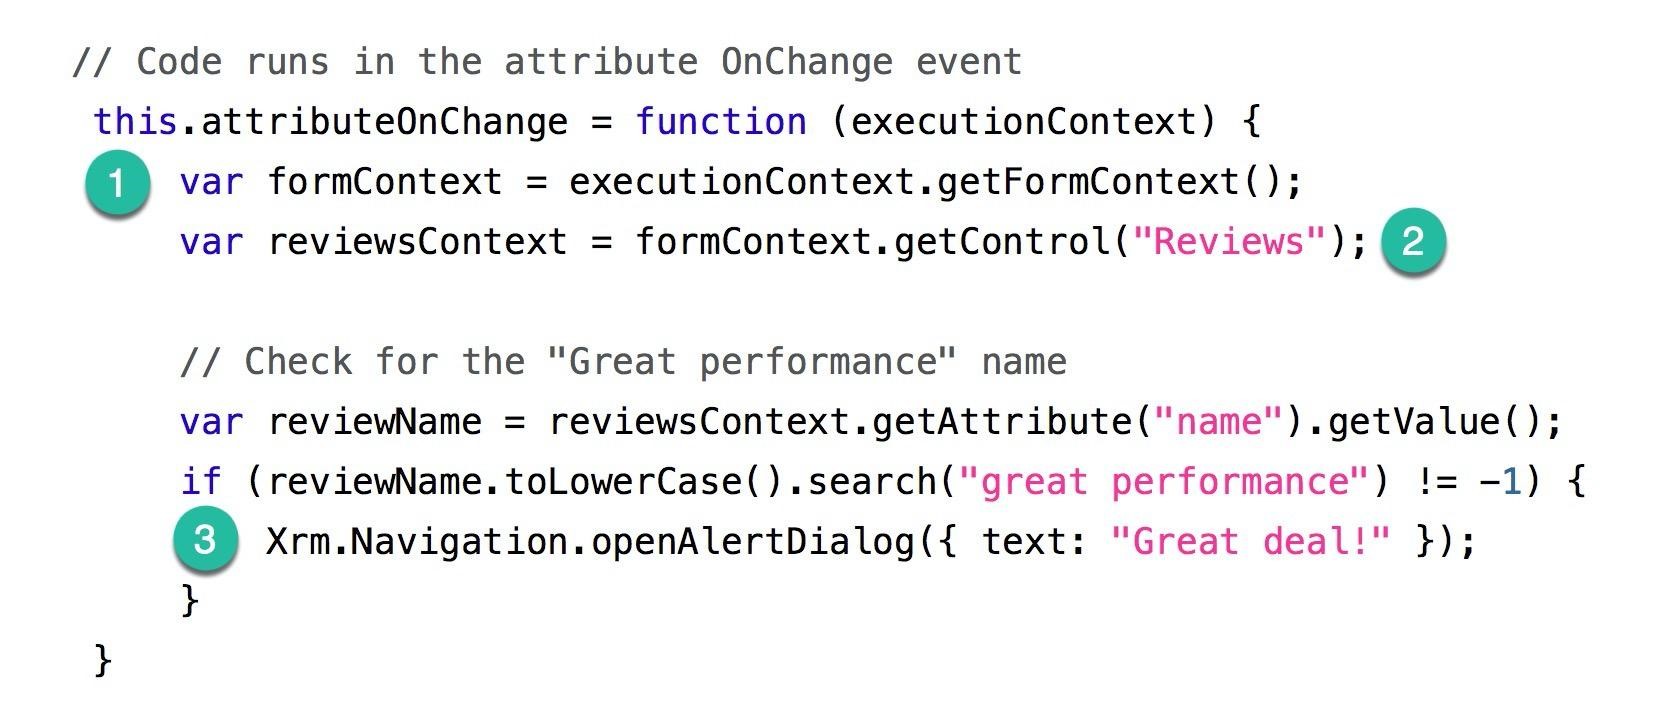 // Code runs in the attribute OnChange event
this.attributeOnChange = function (executionContext) {
@ var formContext = executionContext.getFormContext();

var reviewsContext = formContext.getControl("Reviews"); @

// Check for the "Great performance" name
var reviewName = reviewsContext.getAttribute("name").getValue();

if (reviewName. toLowerCase().search("great performance") != -1) {
© Xrm.Navigation.openAlertDialog({ text: "Great deal!" });
}